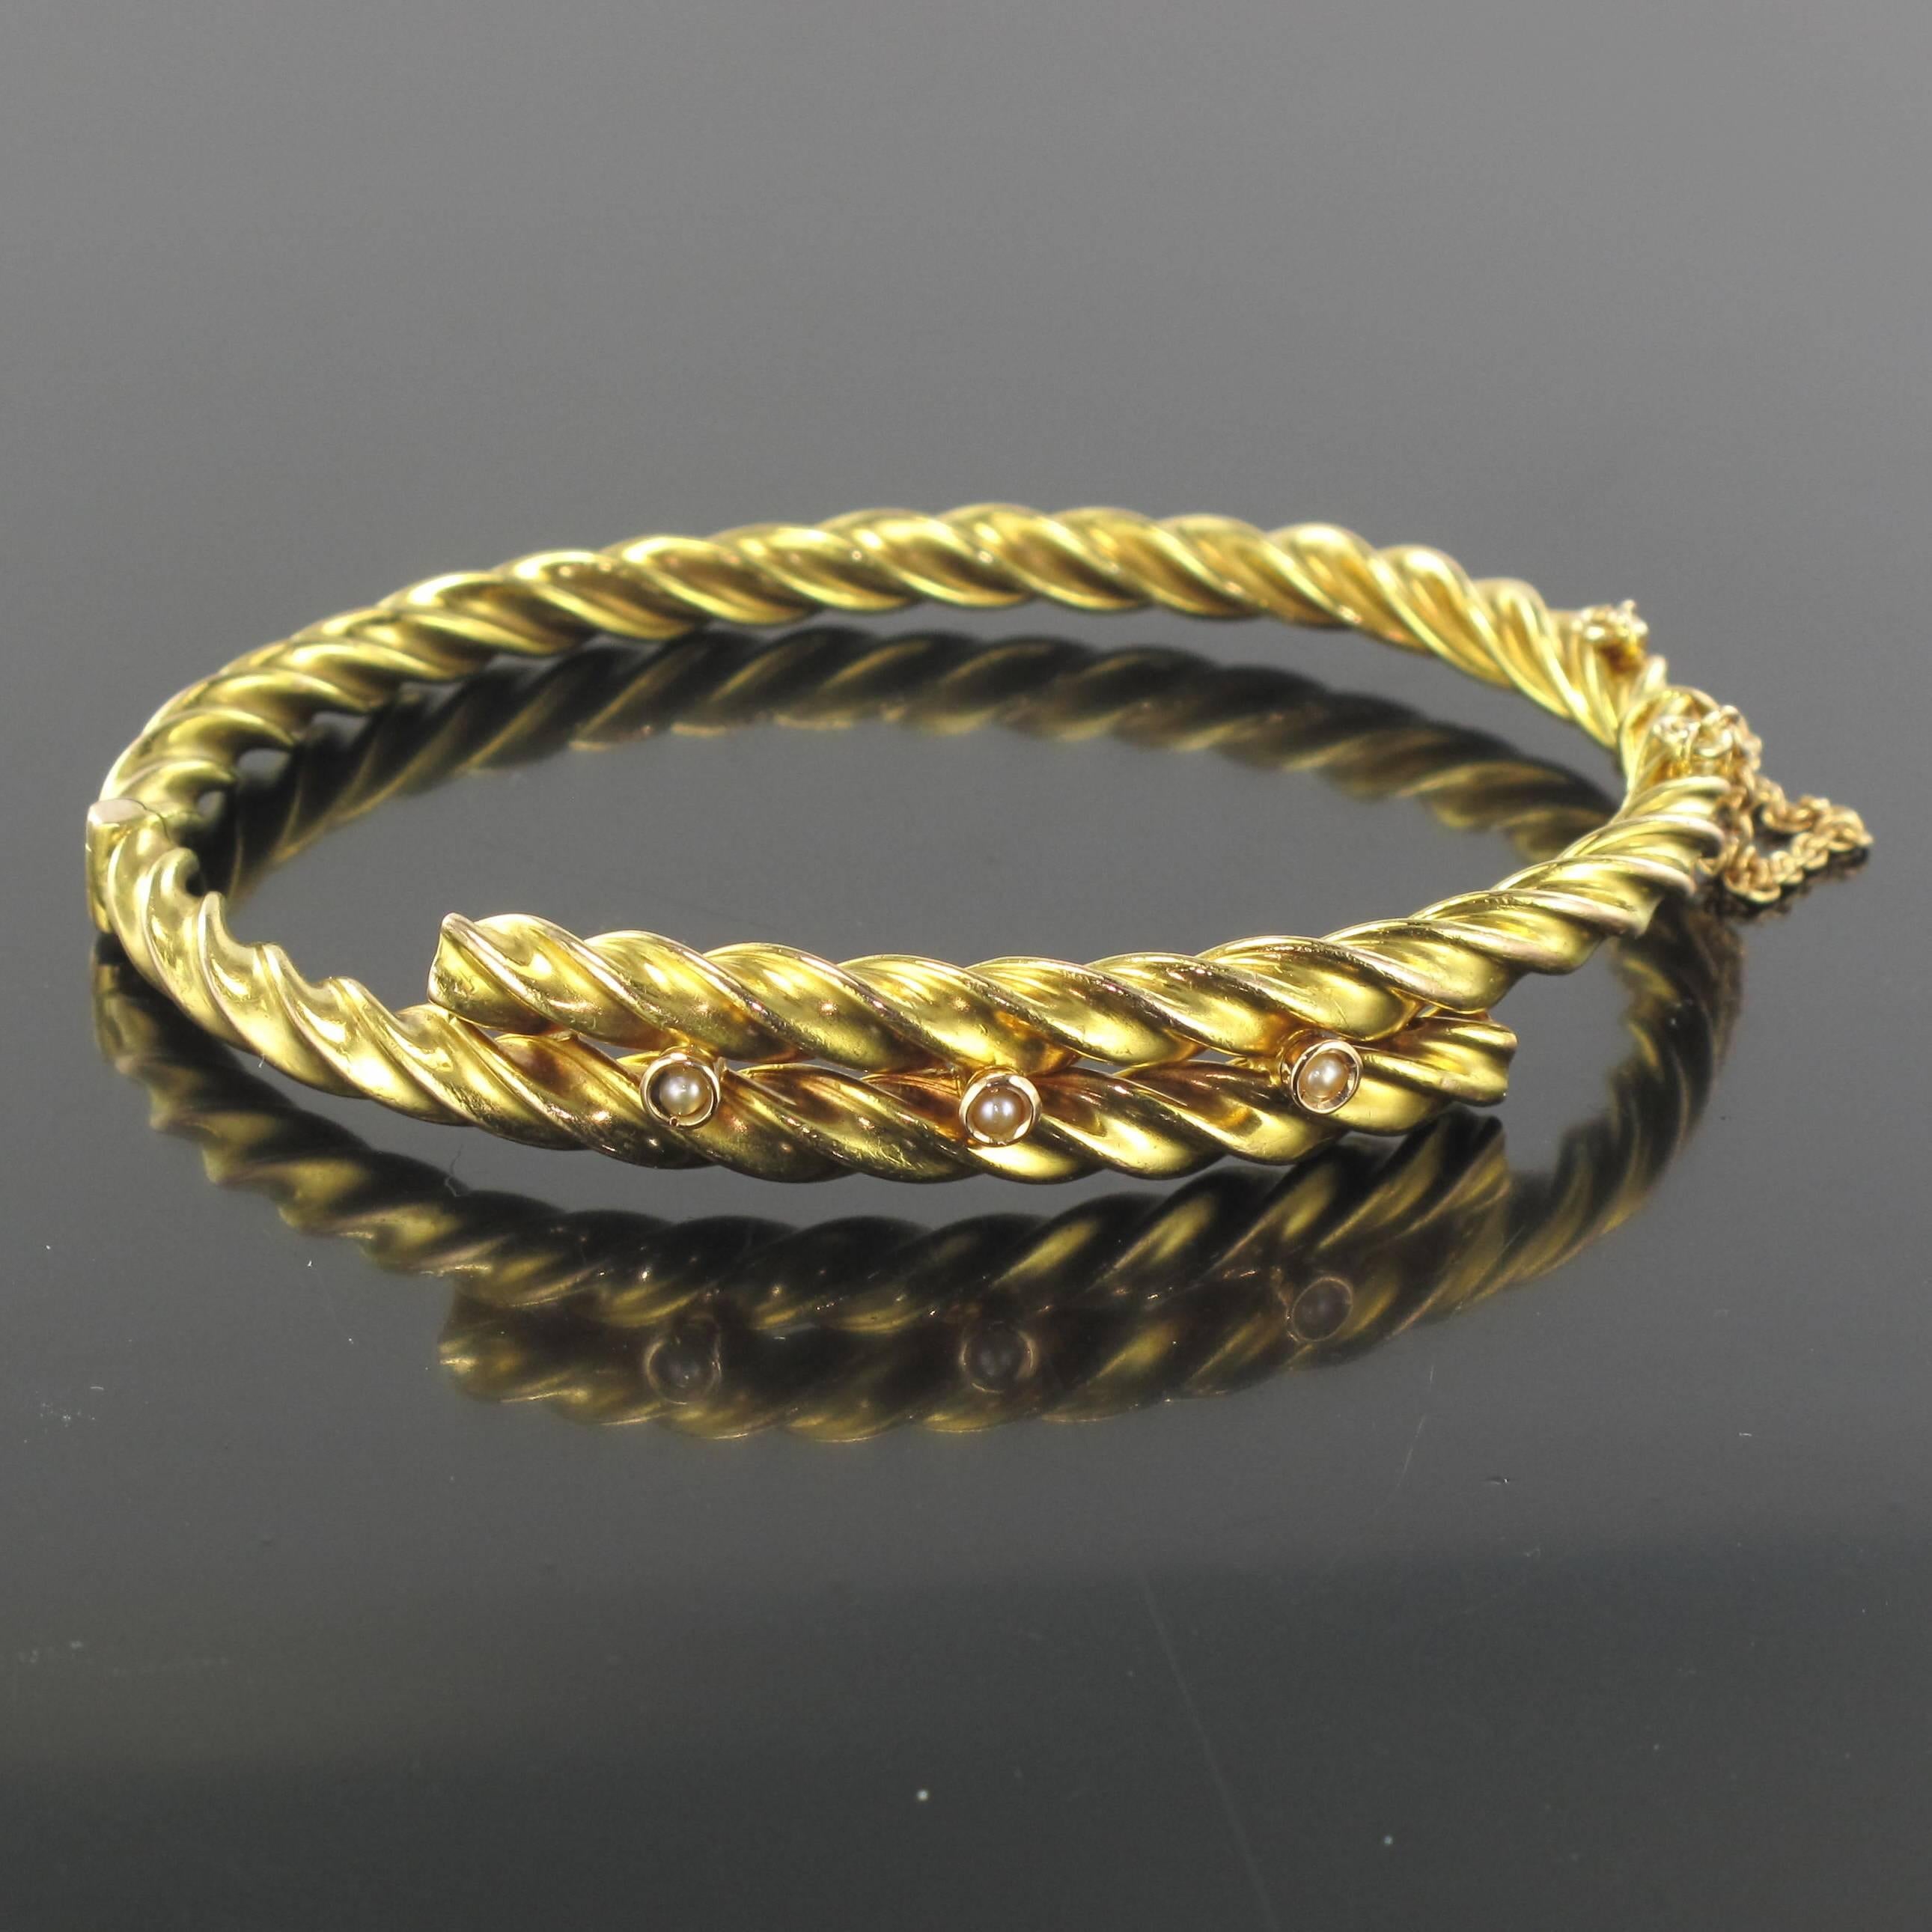 Bracelet in 14 carat yellow gold.
A striking antique oval bracelet composed of twisted gold that overlaps at the top. This bangle bracelet is set with 3 fine half pearls and has a clip clasp with a safety chain. 
Circumference: 21.3 cm, width at the